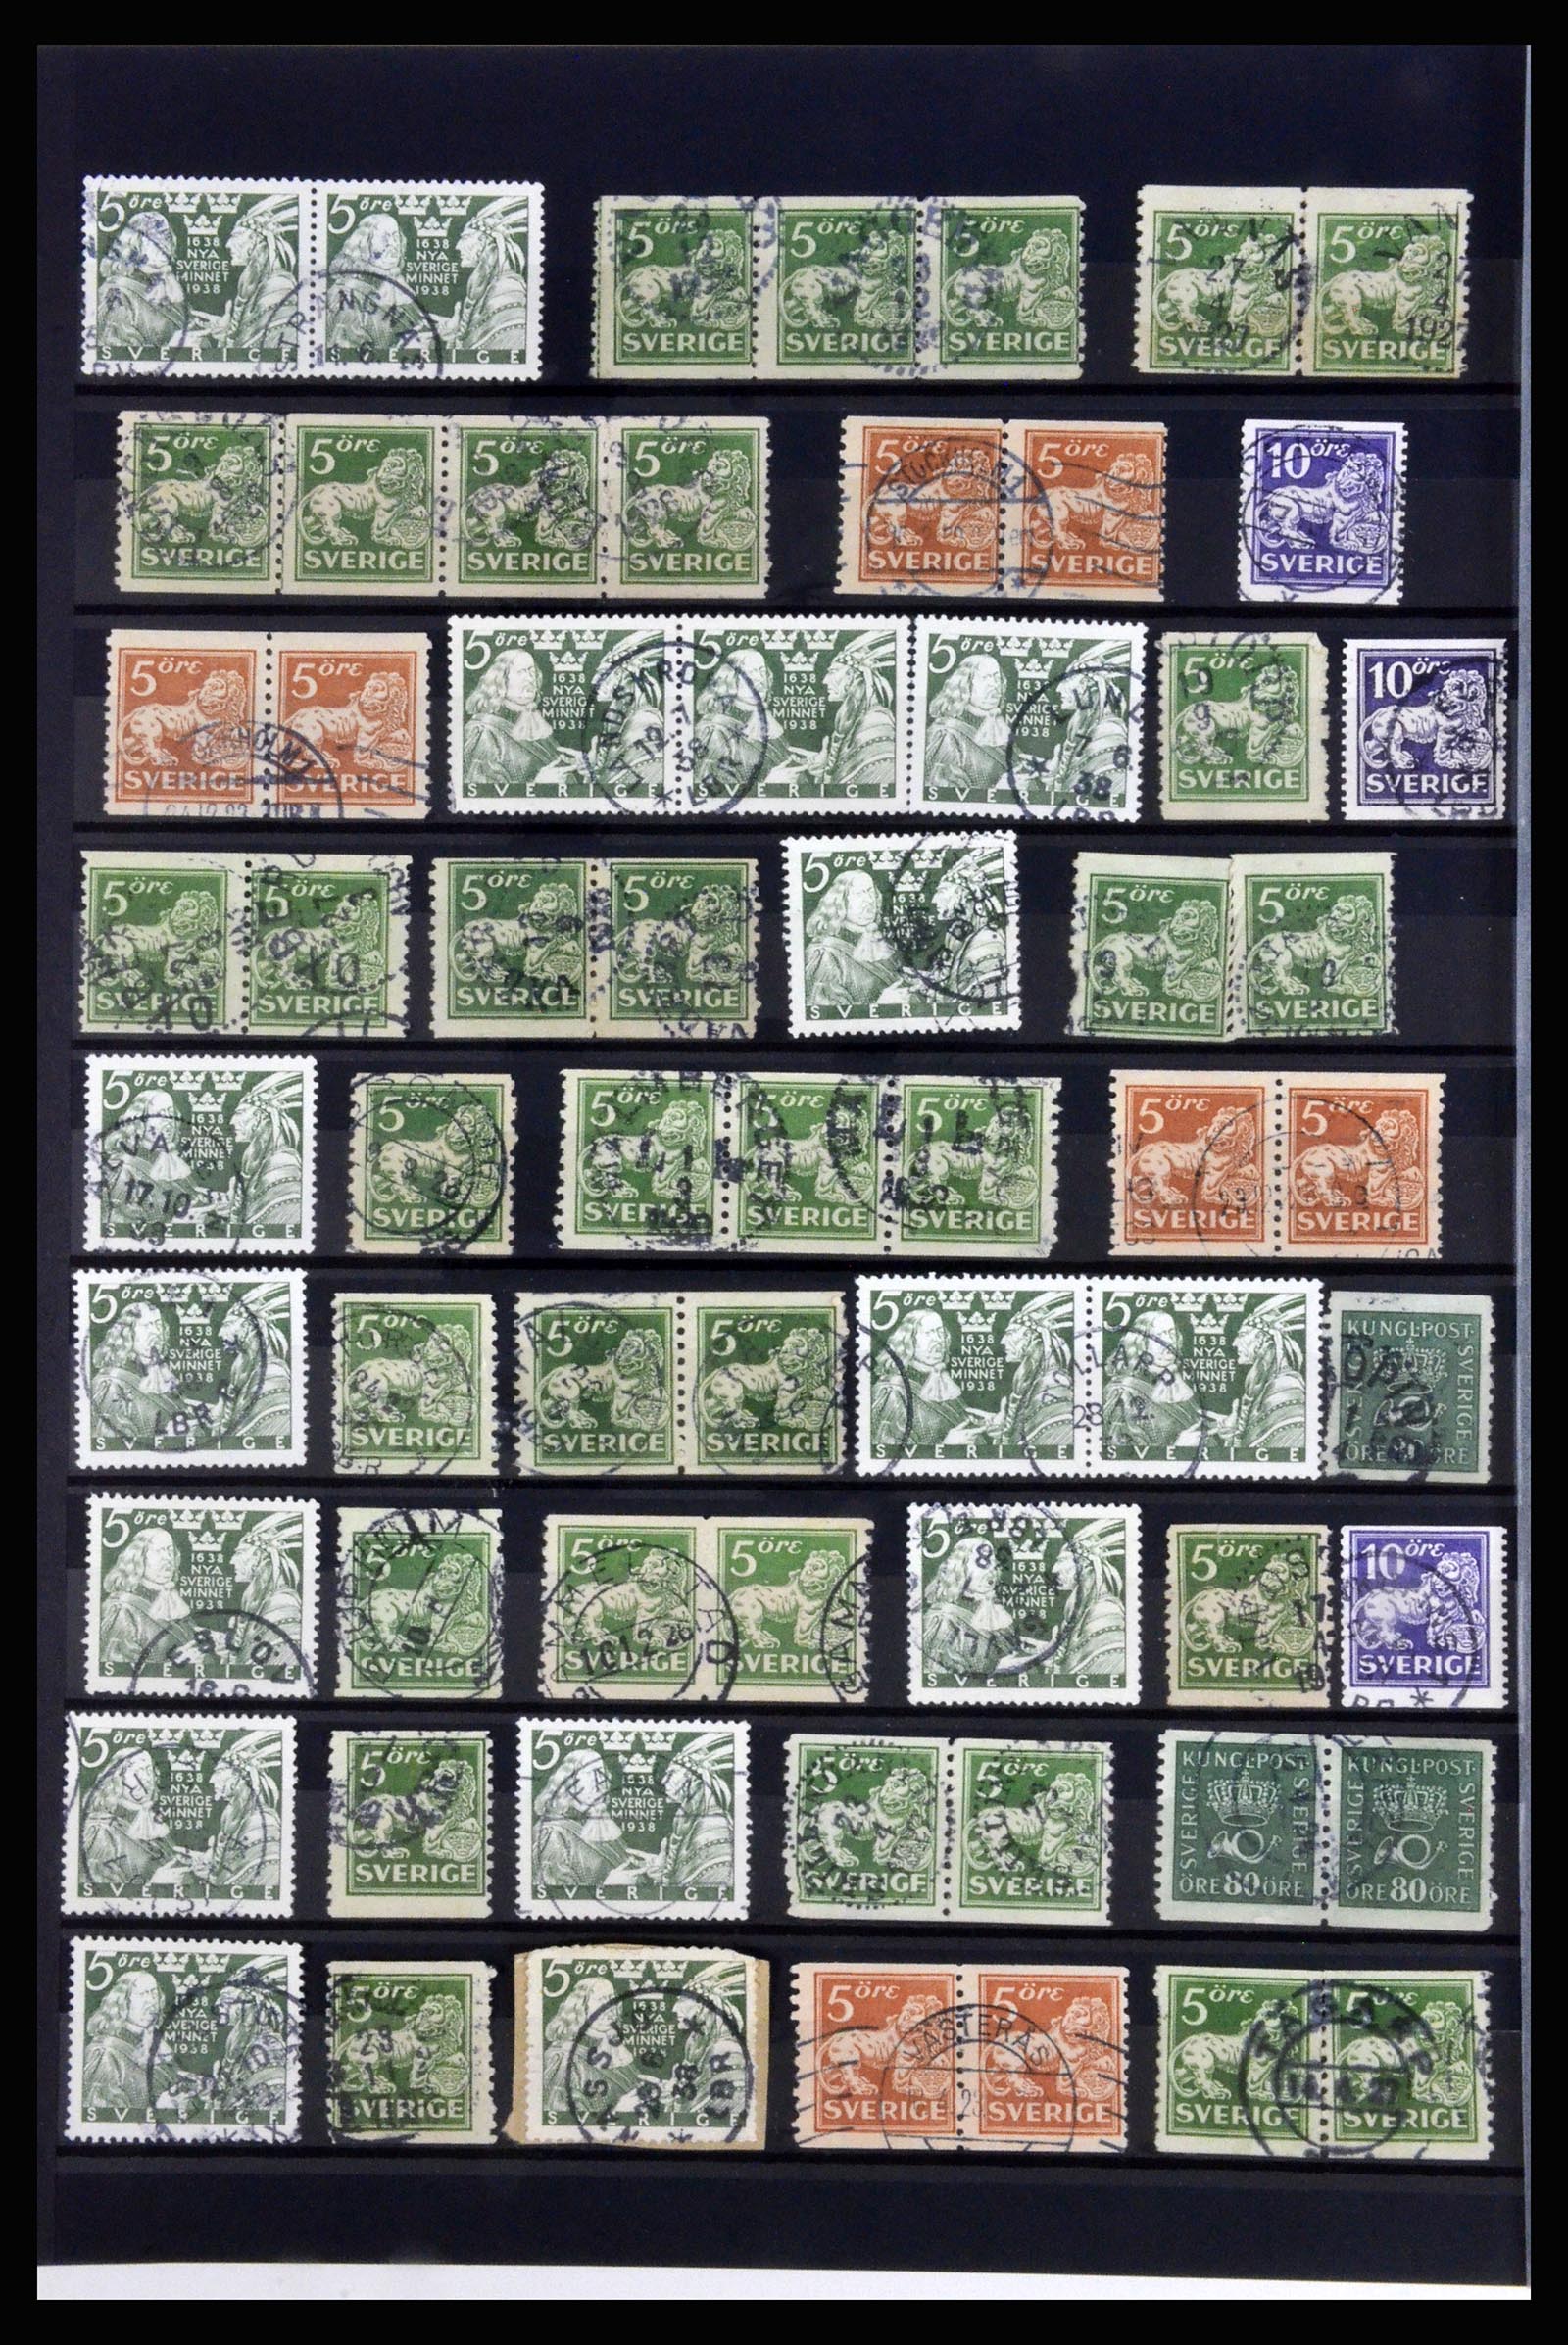 36316 028 - Stamp collection 36316 Sweden cancellations 1920-1938.